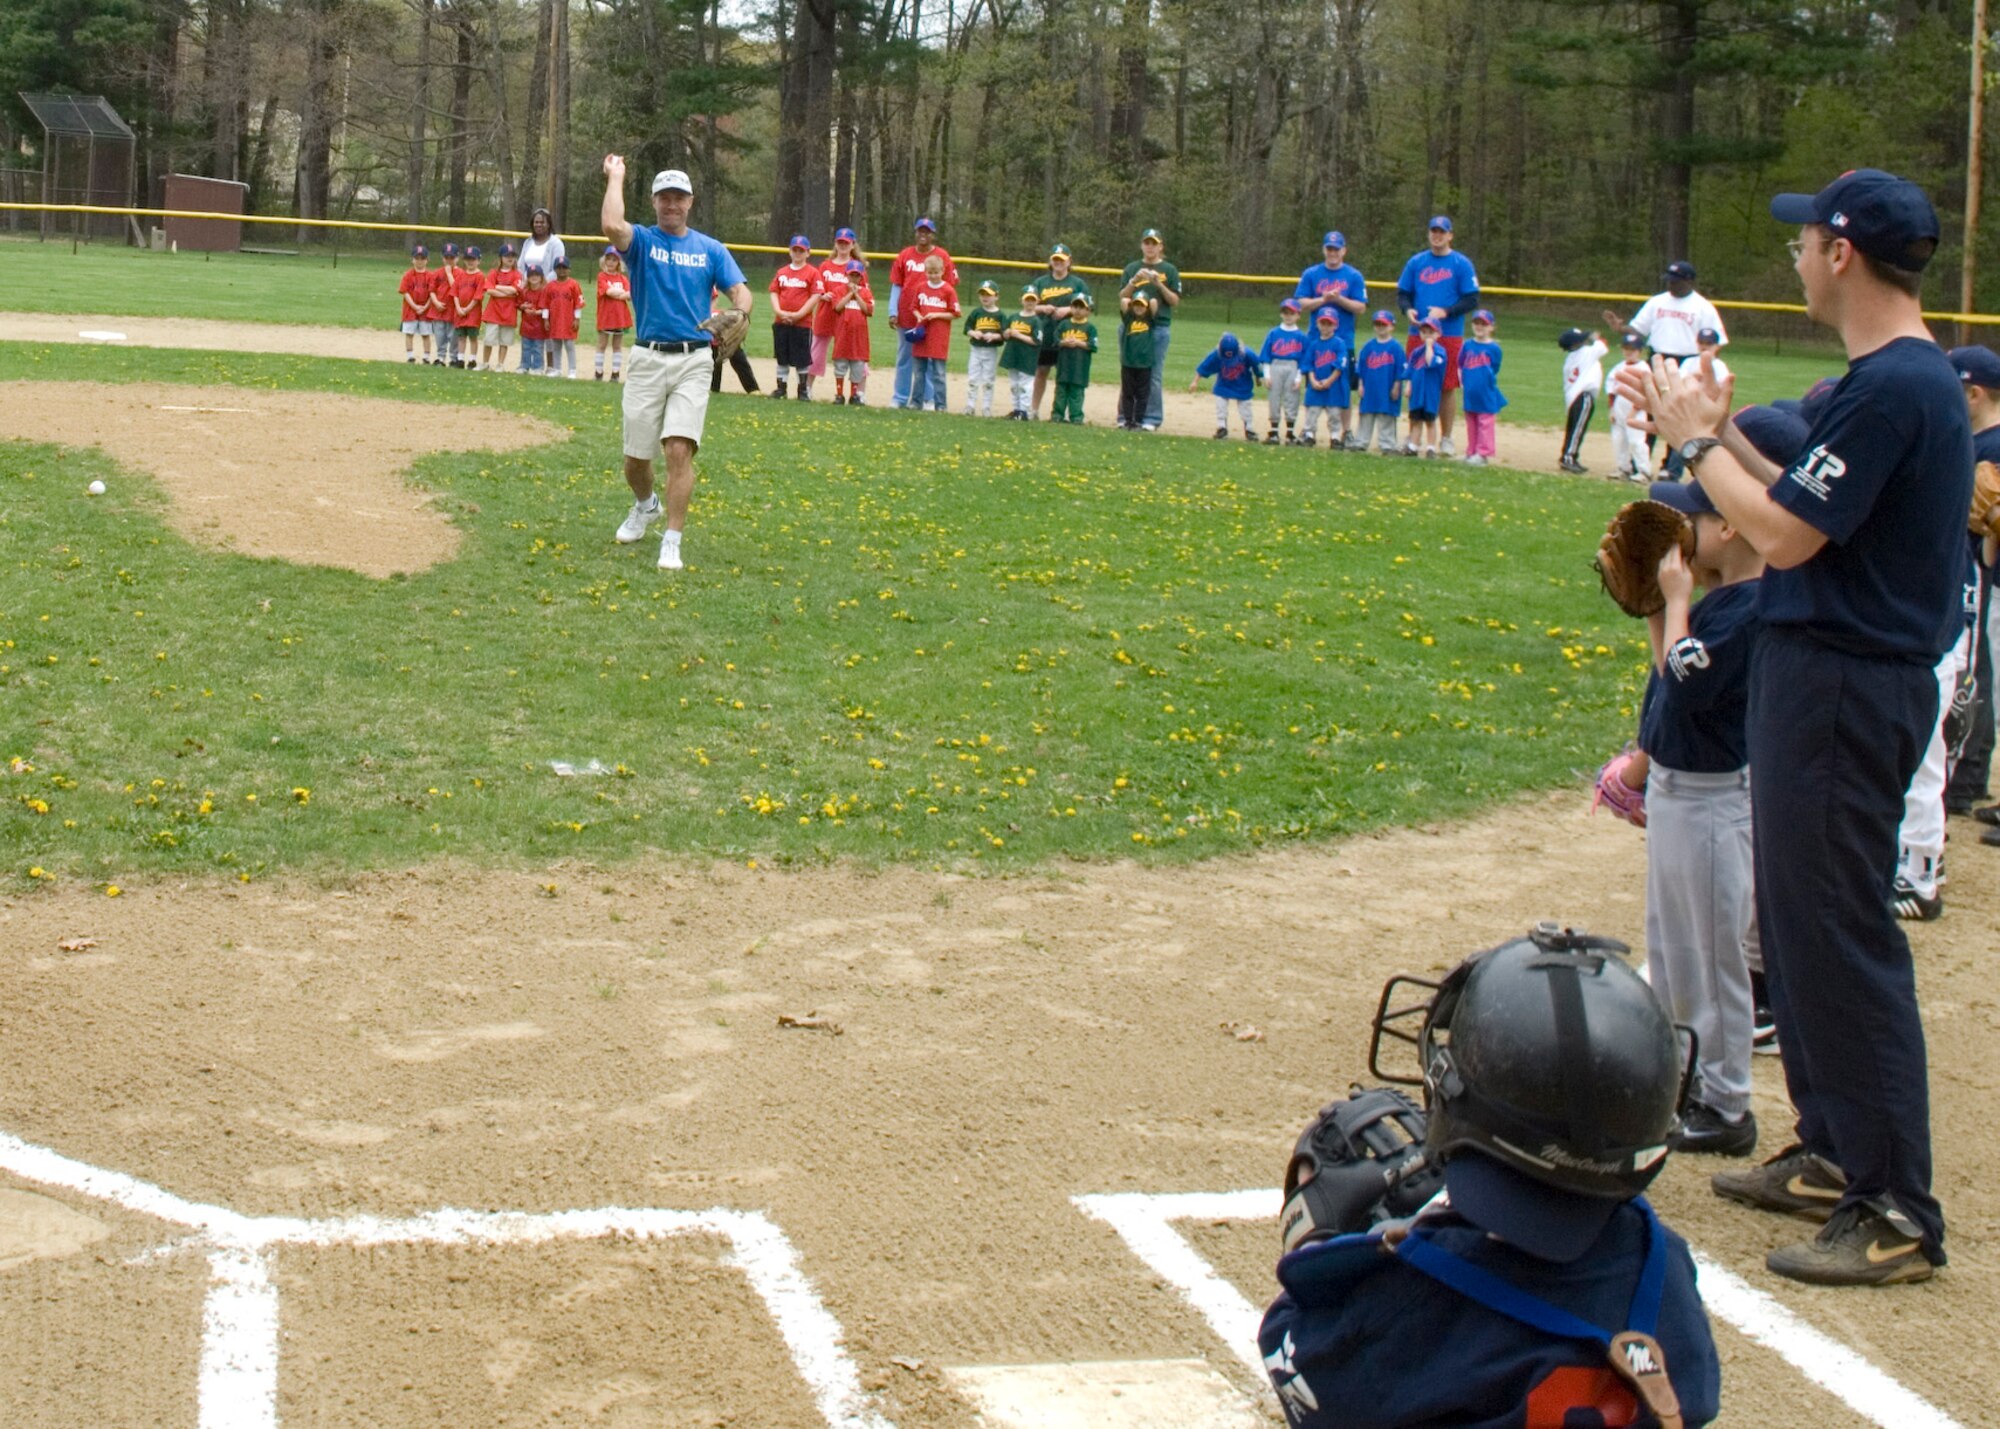 HANSCOM AIR FORCE BASE, Mass. – Col. Dave Orr, 66th Air Base Wing commander throws out the first pitch of the season during the Hanscom Little League season opener on May 2. (U.S. Air Force photo by Rick Berry)